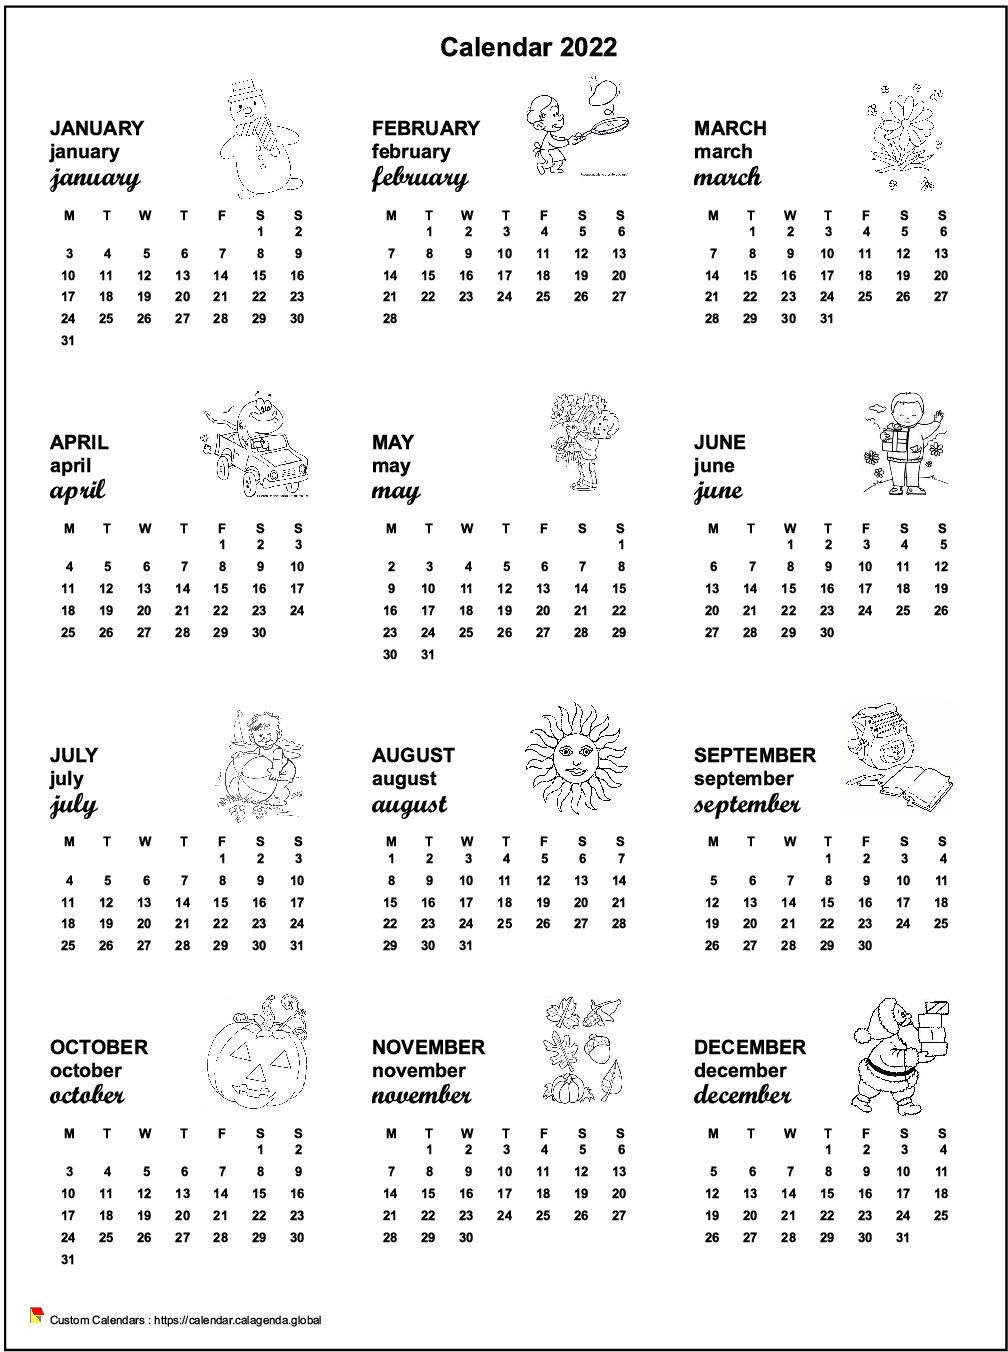 Calendar 2062 annual maternal and primary school